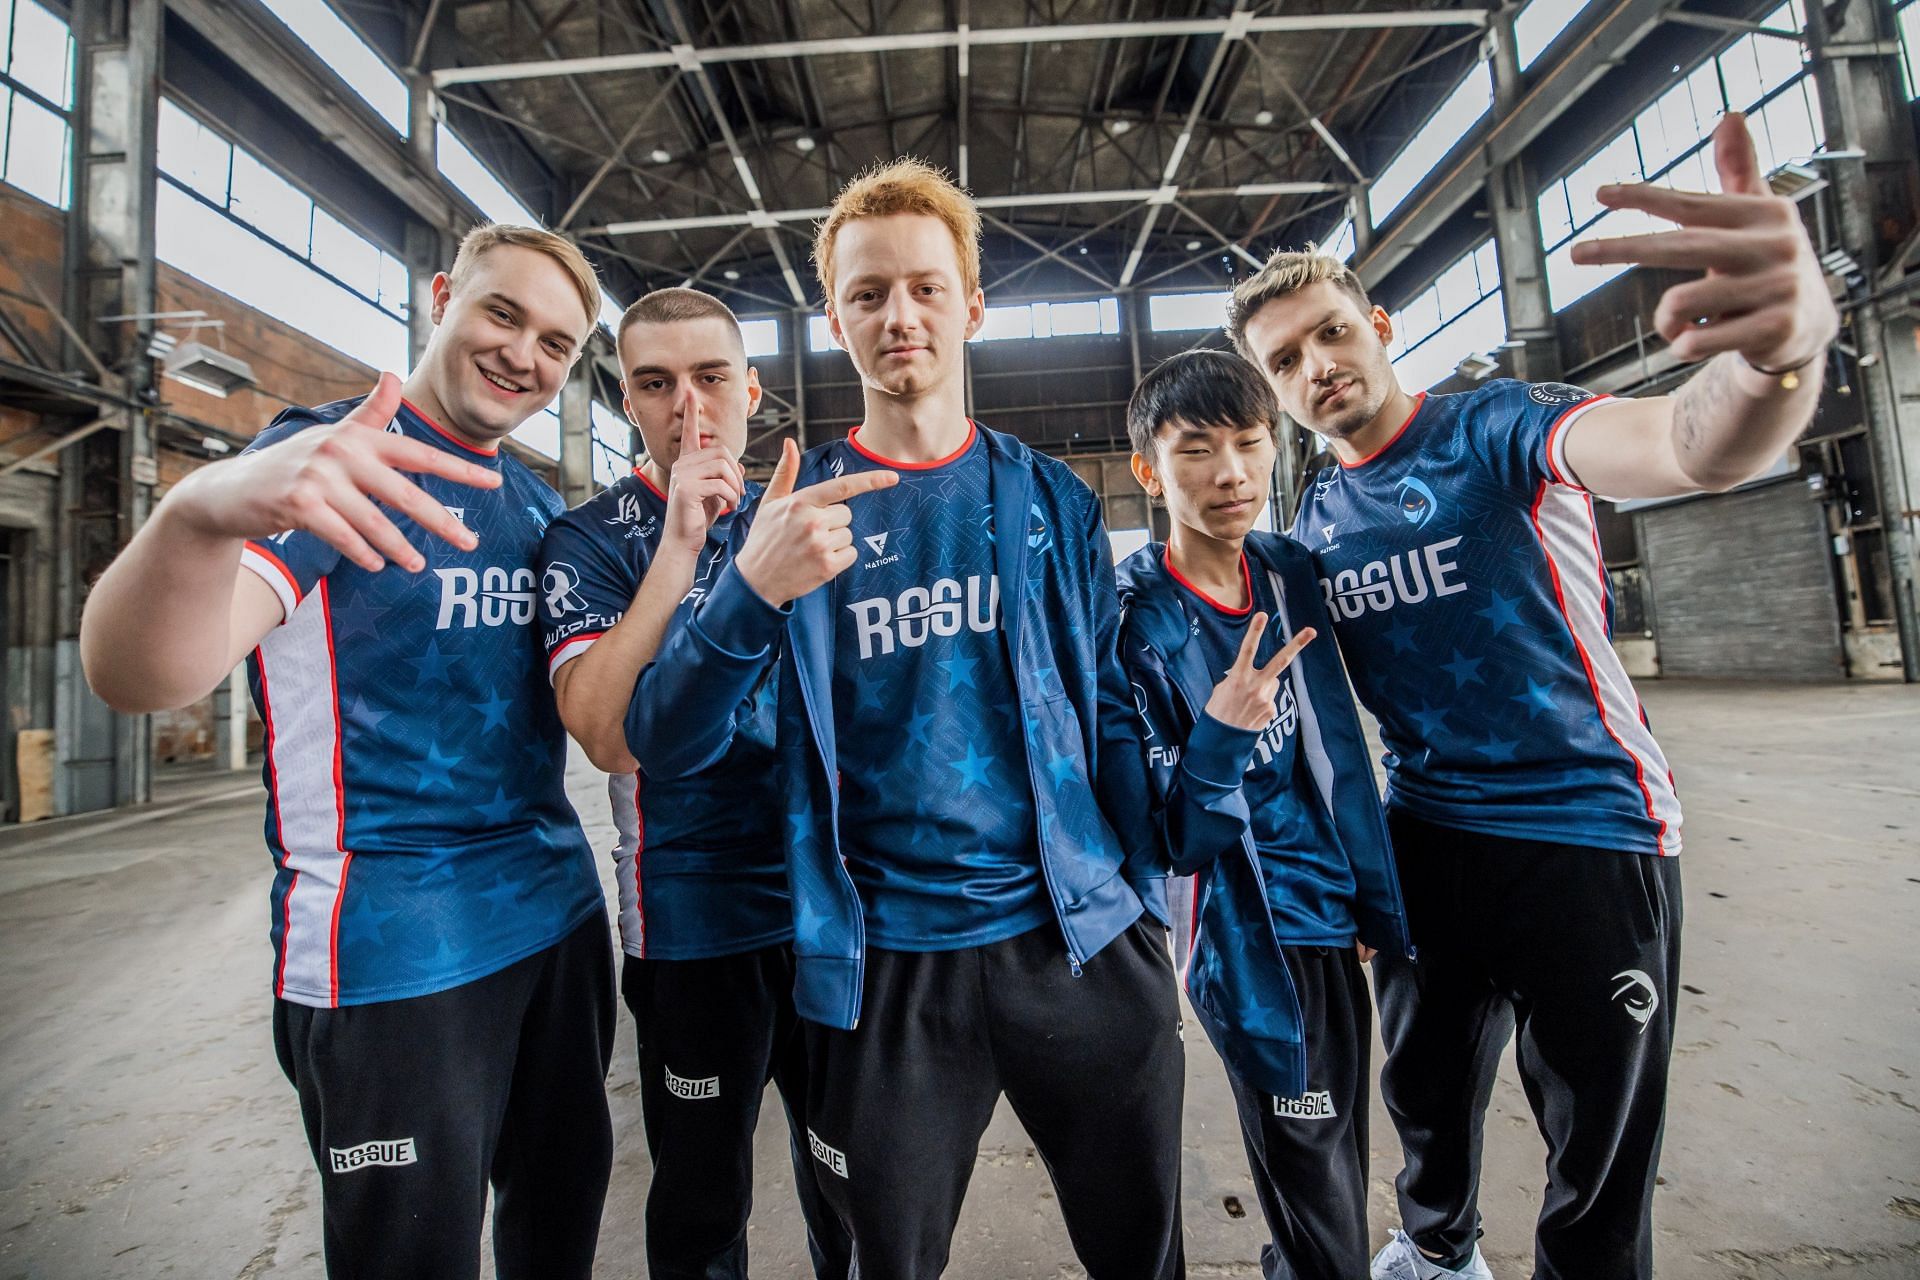 Rogue has been styling on its opponents so far at Worlds 2022 (Image via Riot Games)